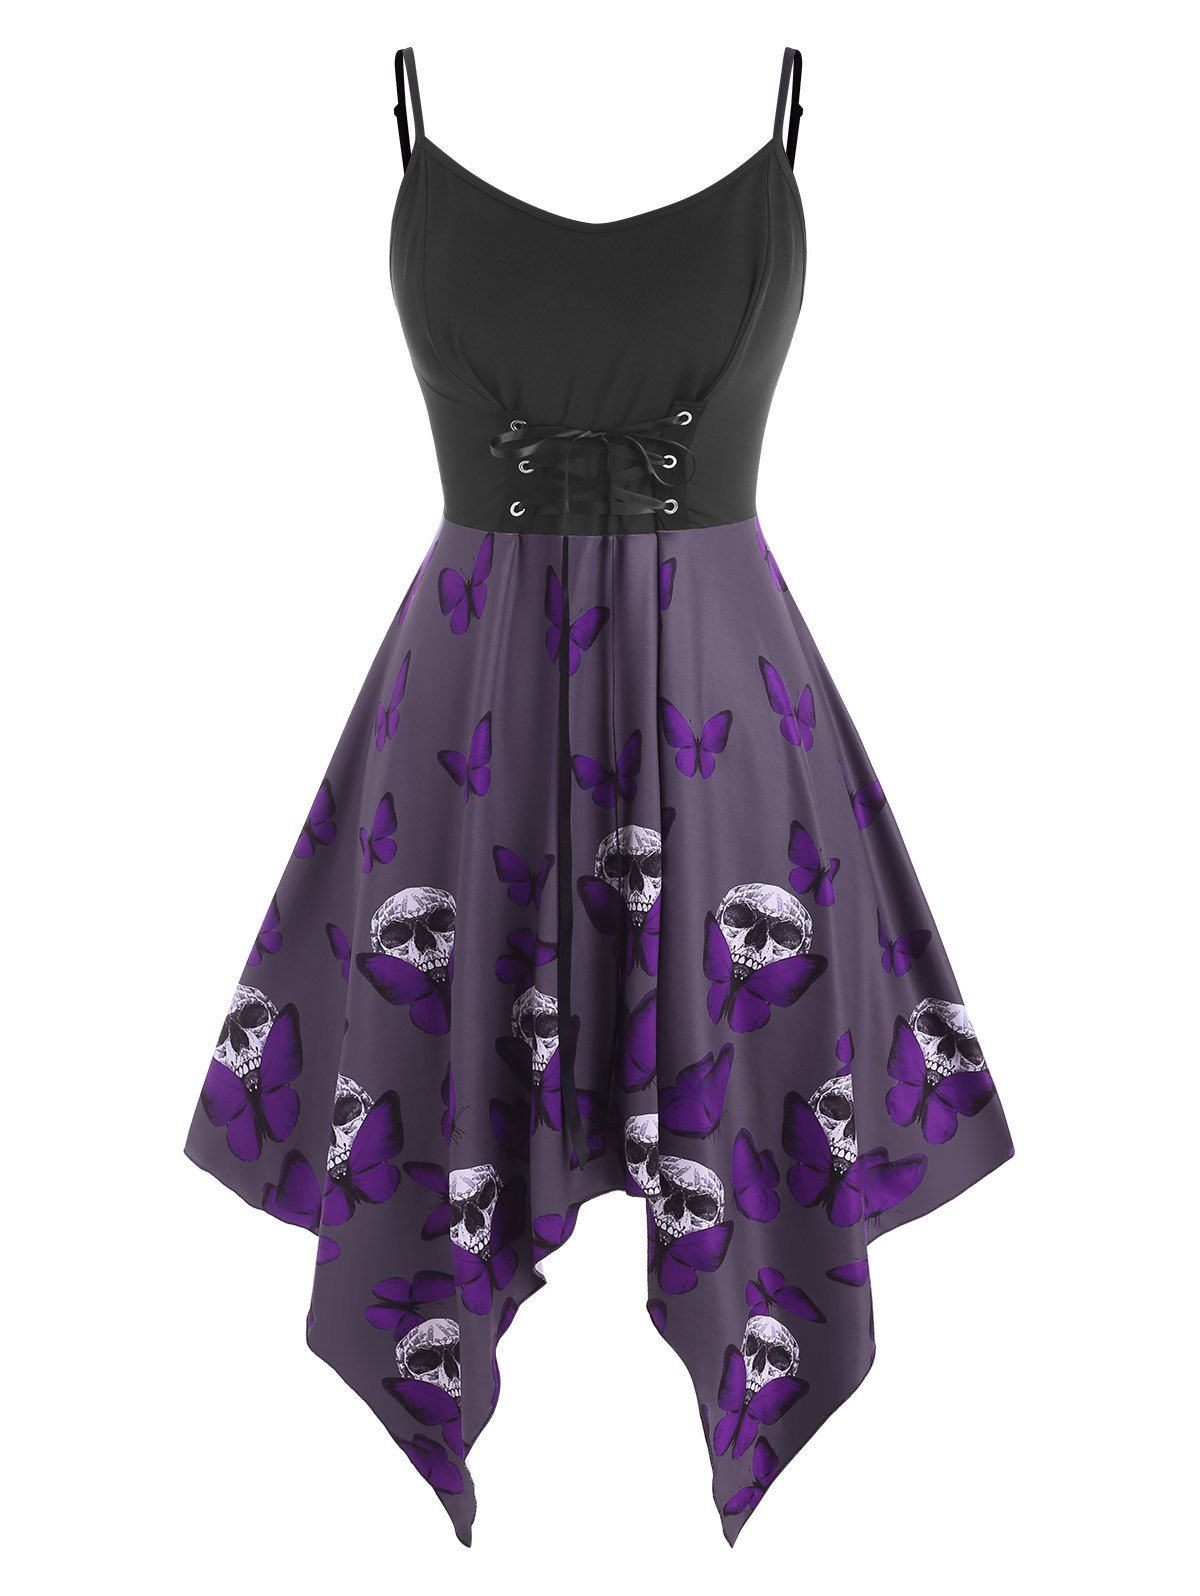 Lace Up Butterfly Skull Halloween Plus Size Cami Dress - PURPLE 1X